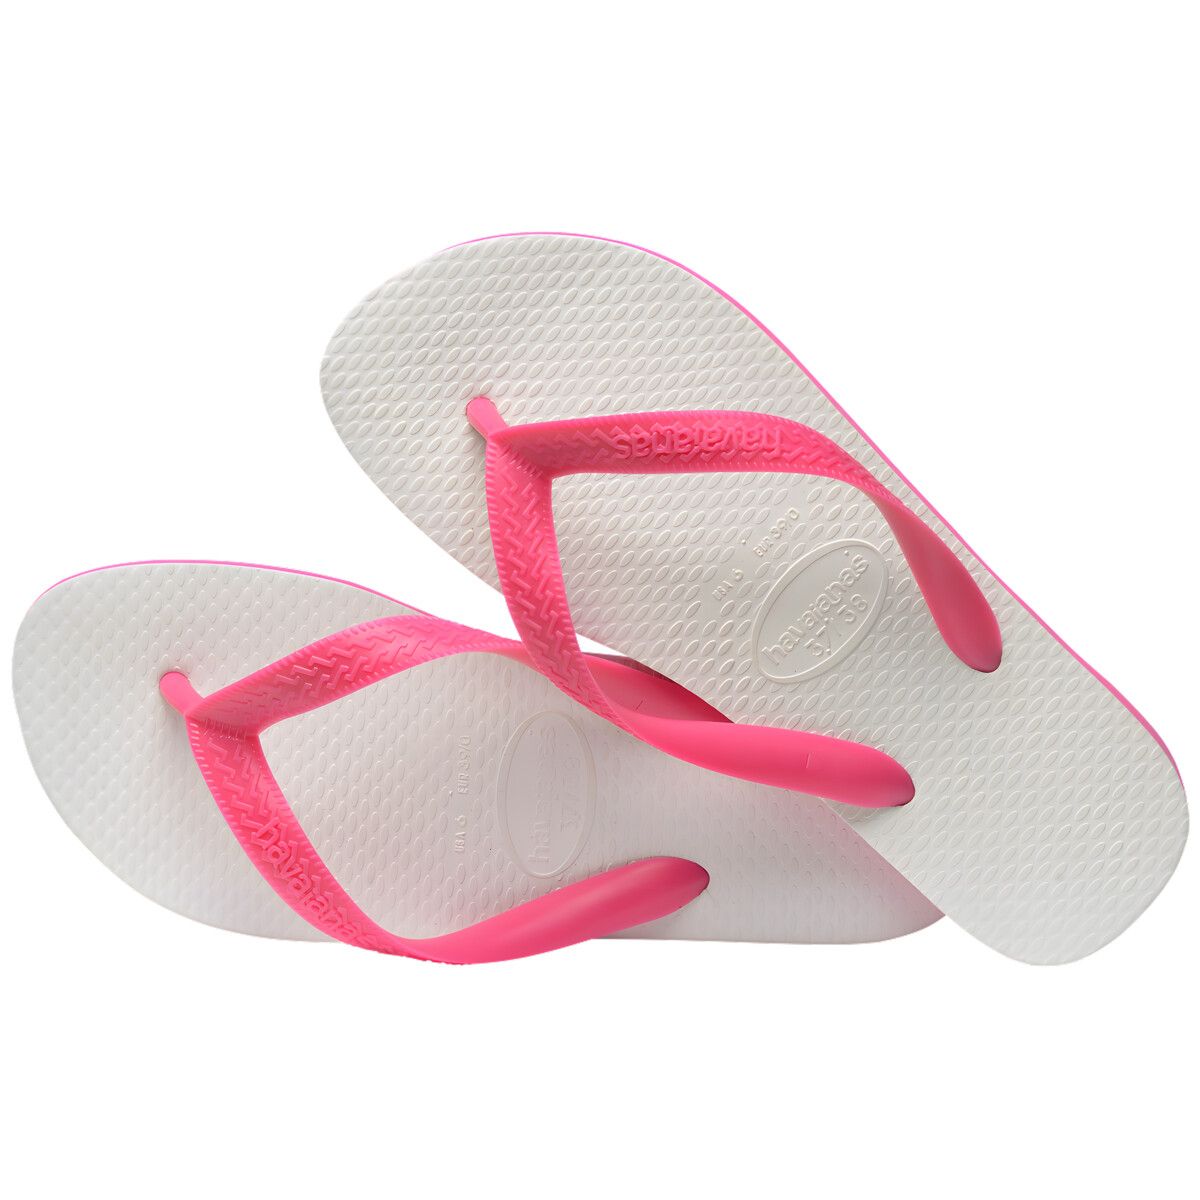 Chinelo Rosa Flux Tradicional Havaianas  n° 41/42 image number 3